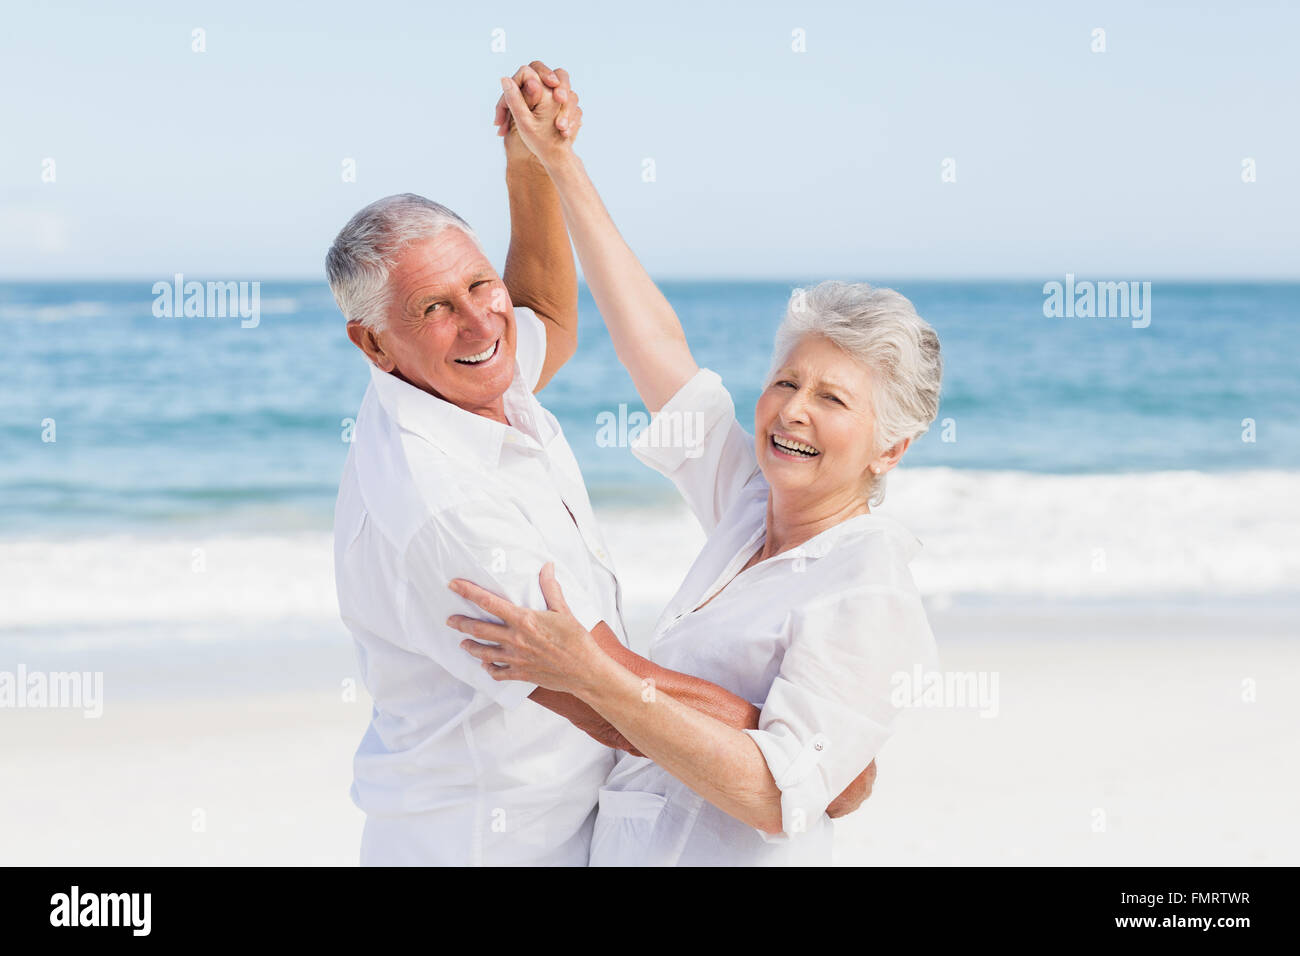 Senior couple Dancing on the beach Banque D'Images